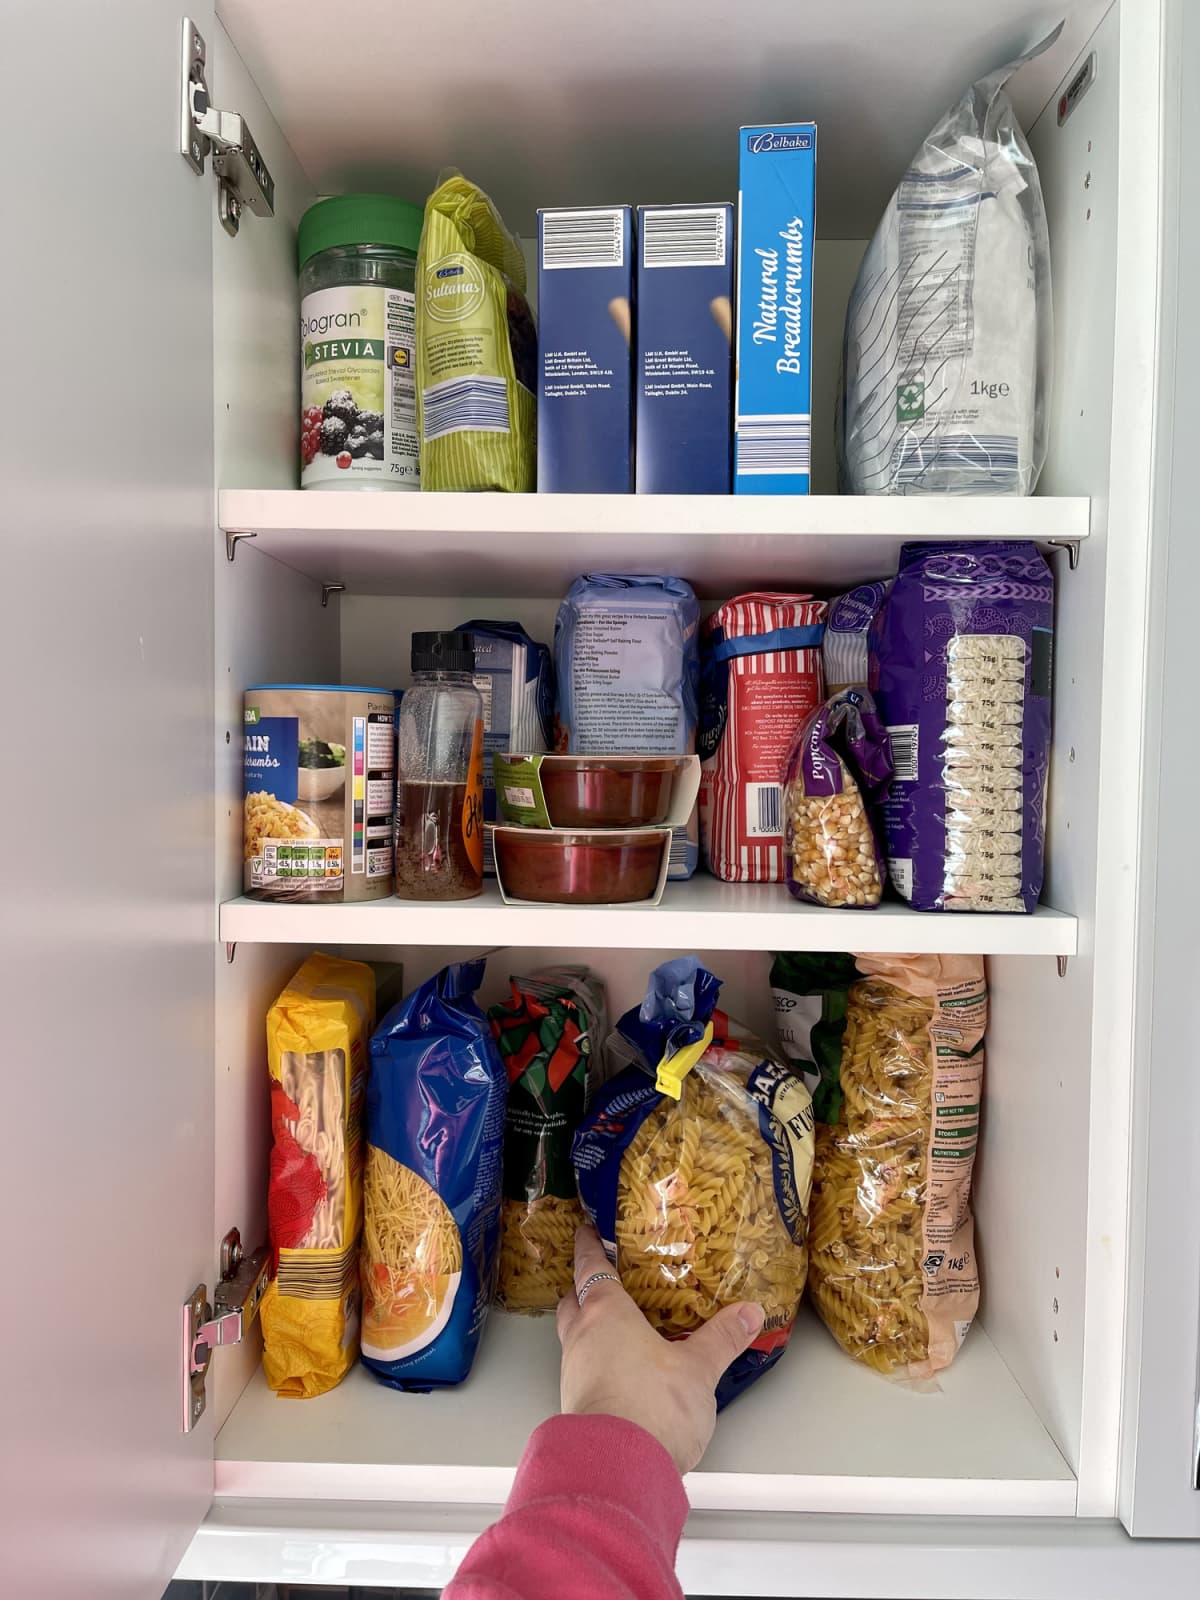 Kitchen cabinet stocked with various food items